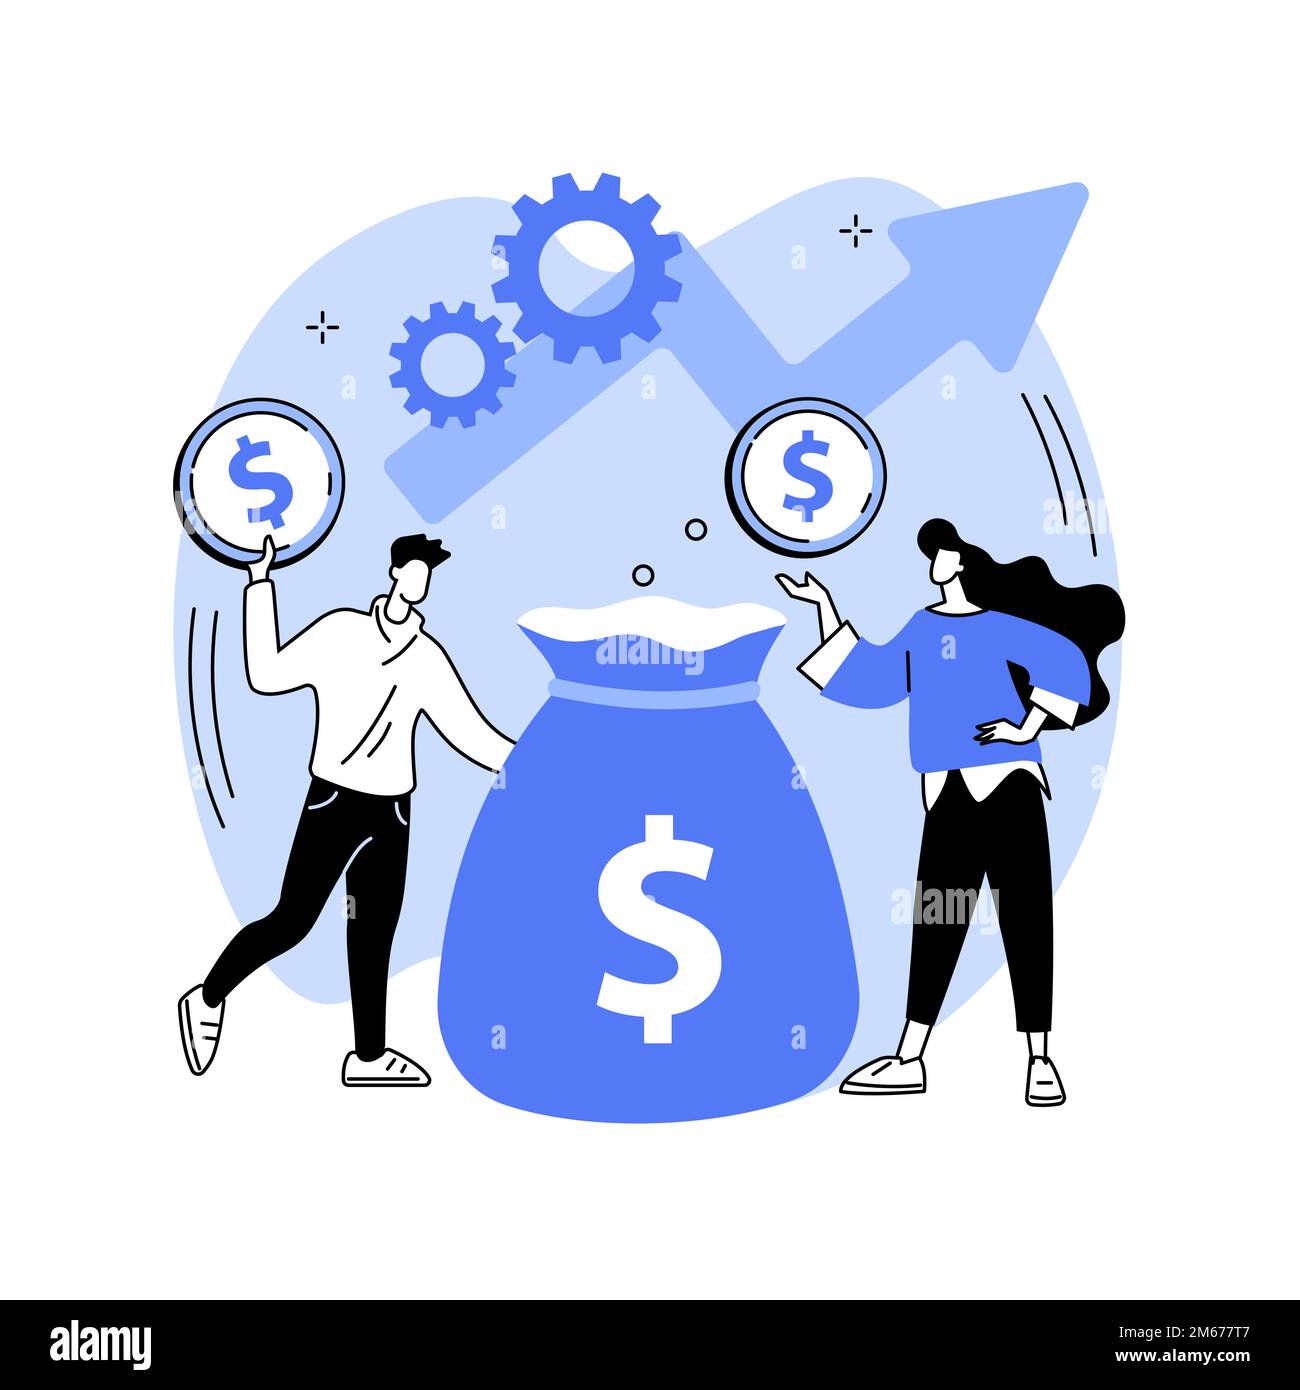 Investment fund abstract concept vector illustration. Investment trust, shareholder scheme, fund creation, business opportunities, corporate venture c Stock Vector